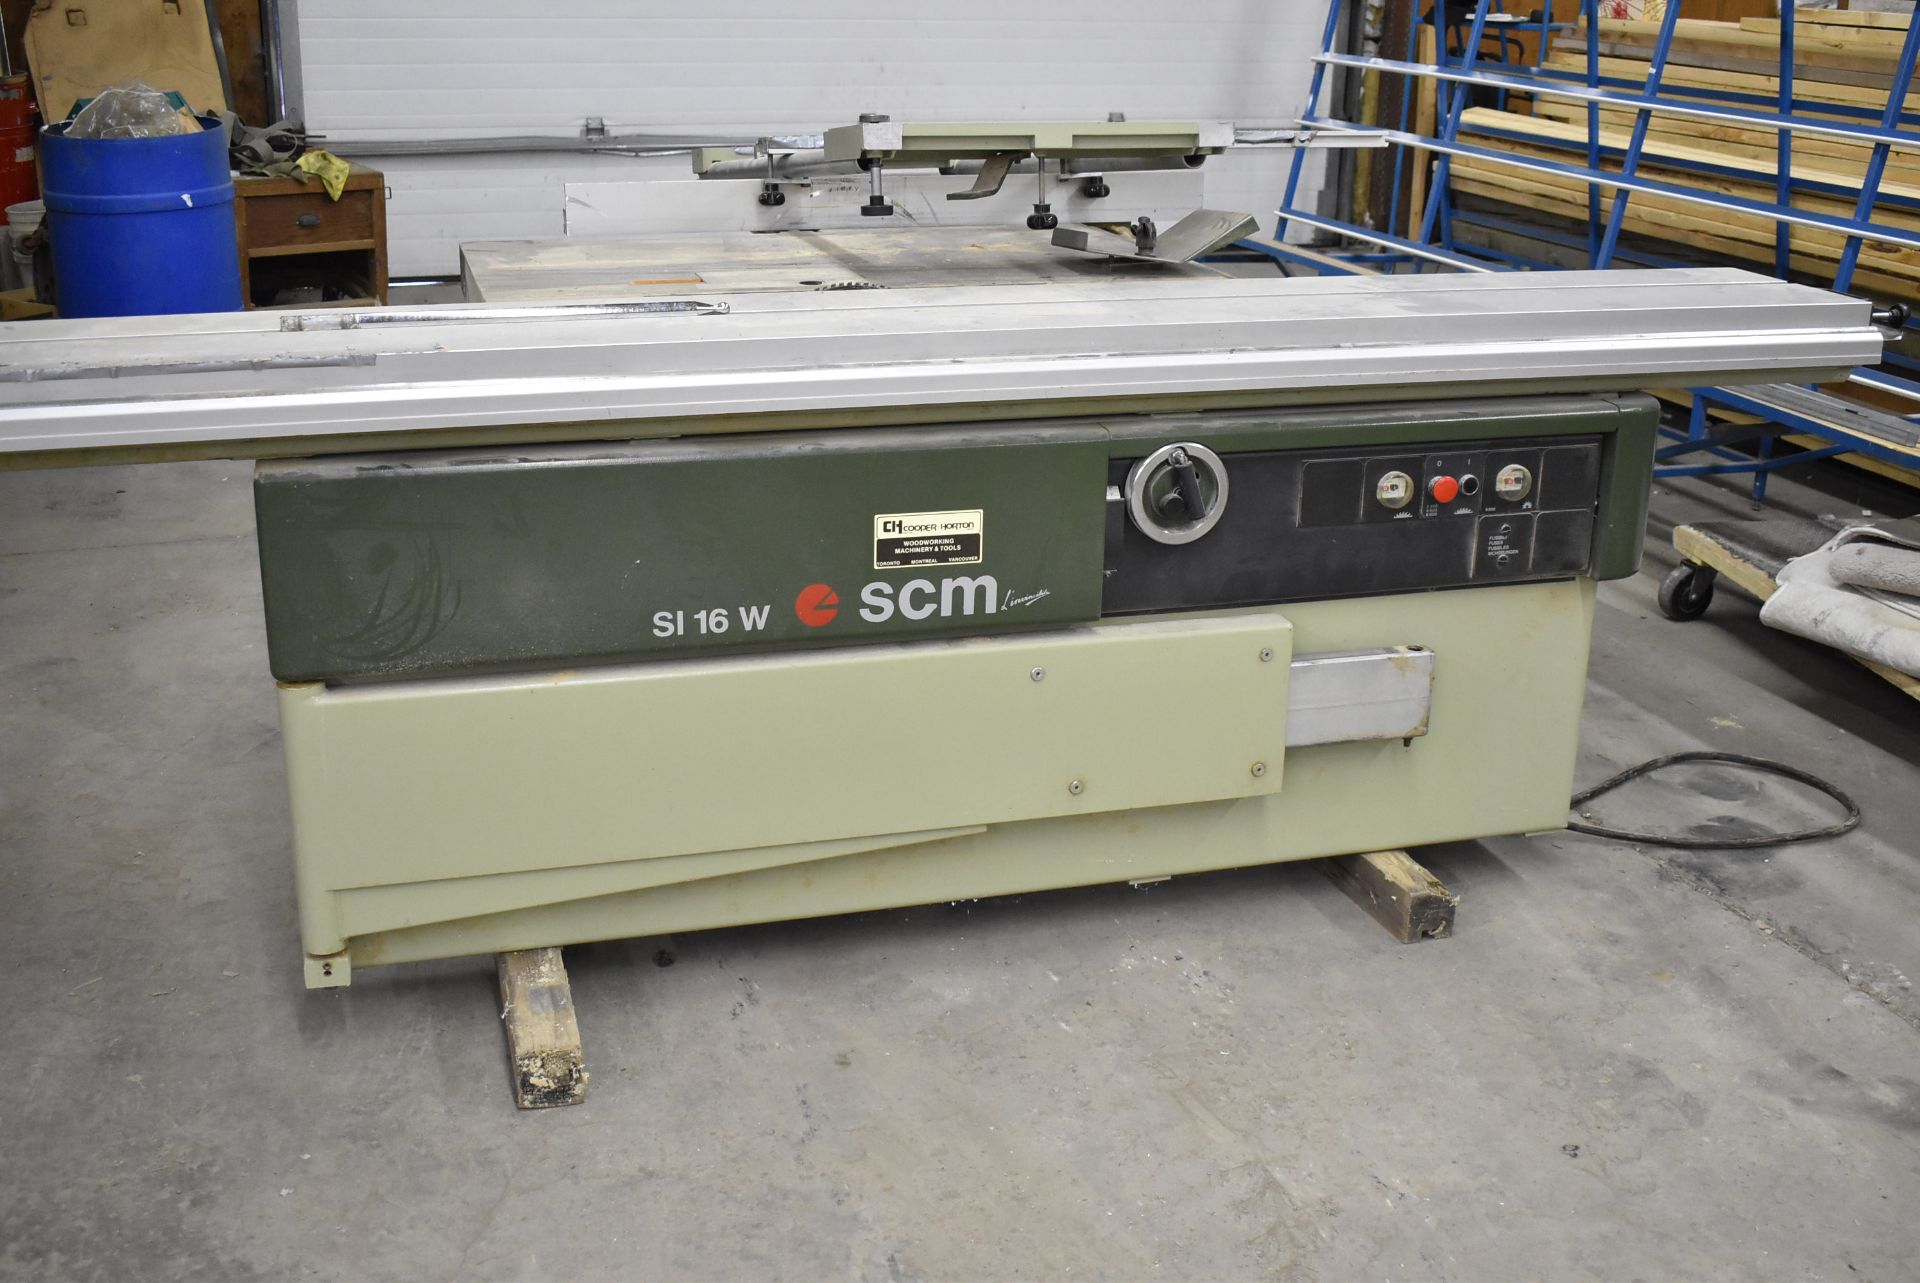 SCM SI 16W 12" SLIDING TABLE SAW, 600V/3PH/60HZ, S/N 050523 (LOCATED AT 1636 CHARLES ST, WHITBY,